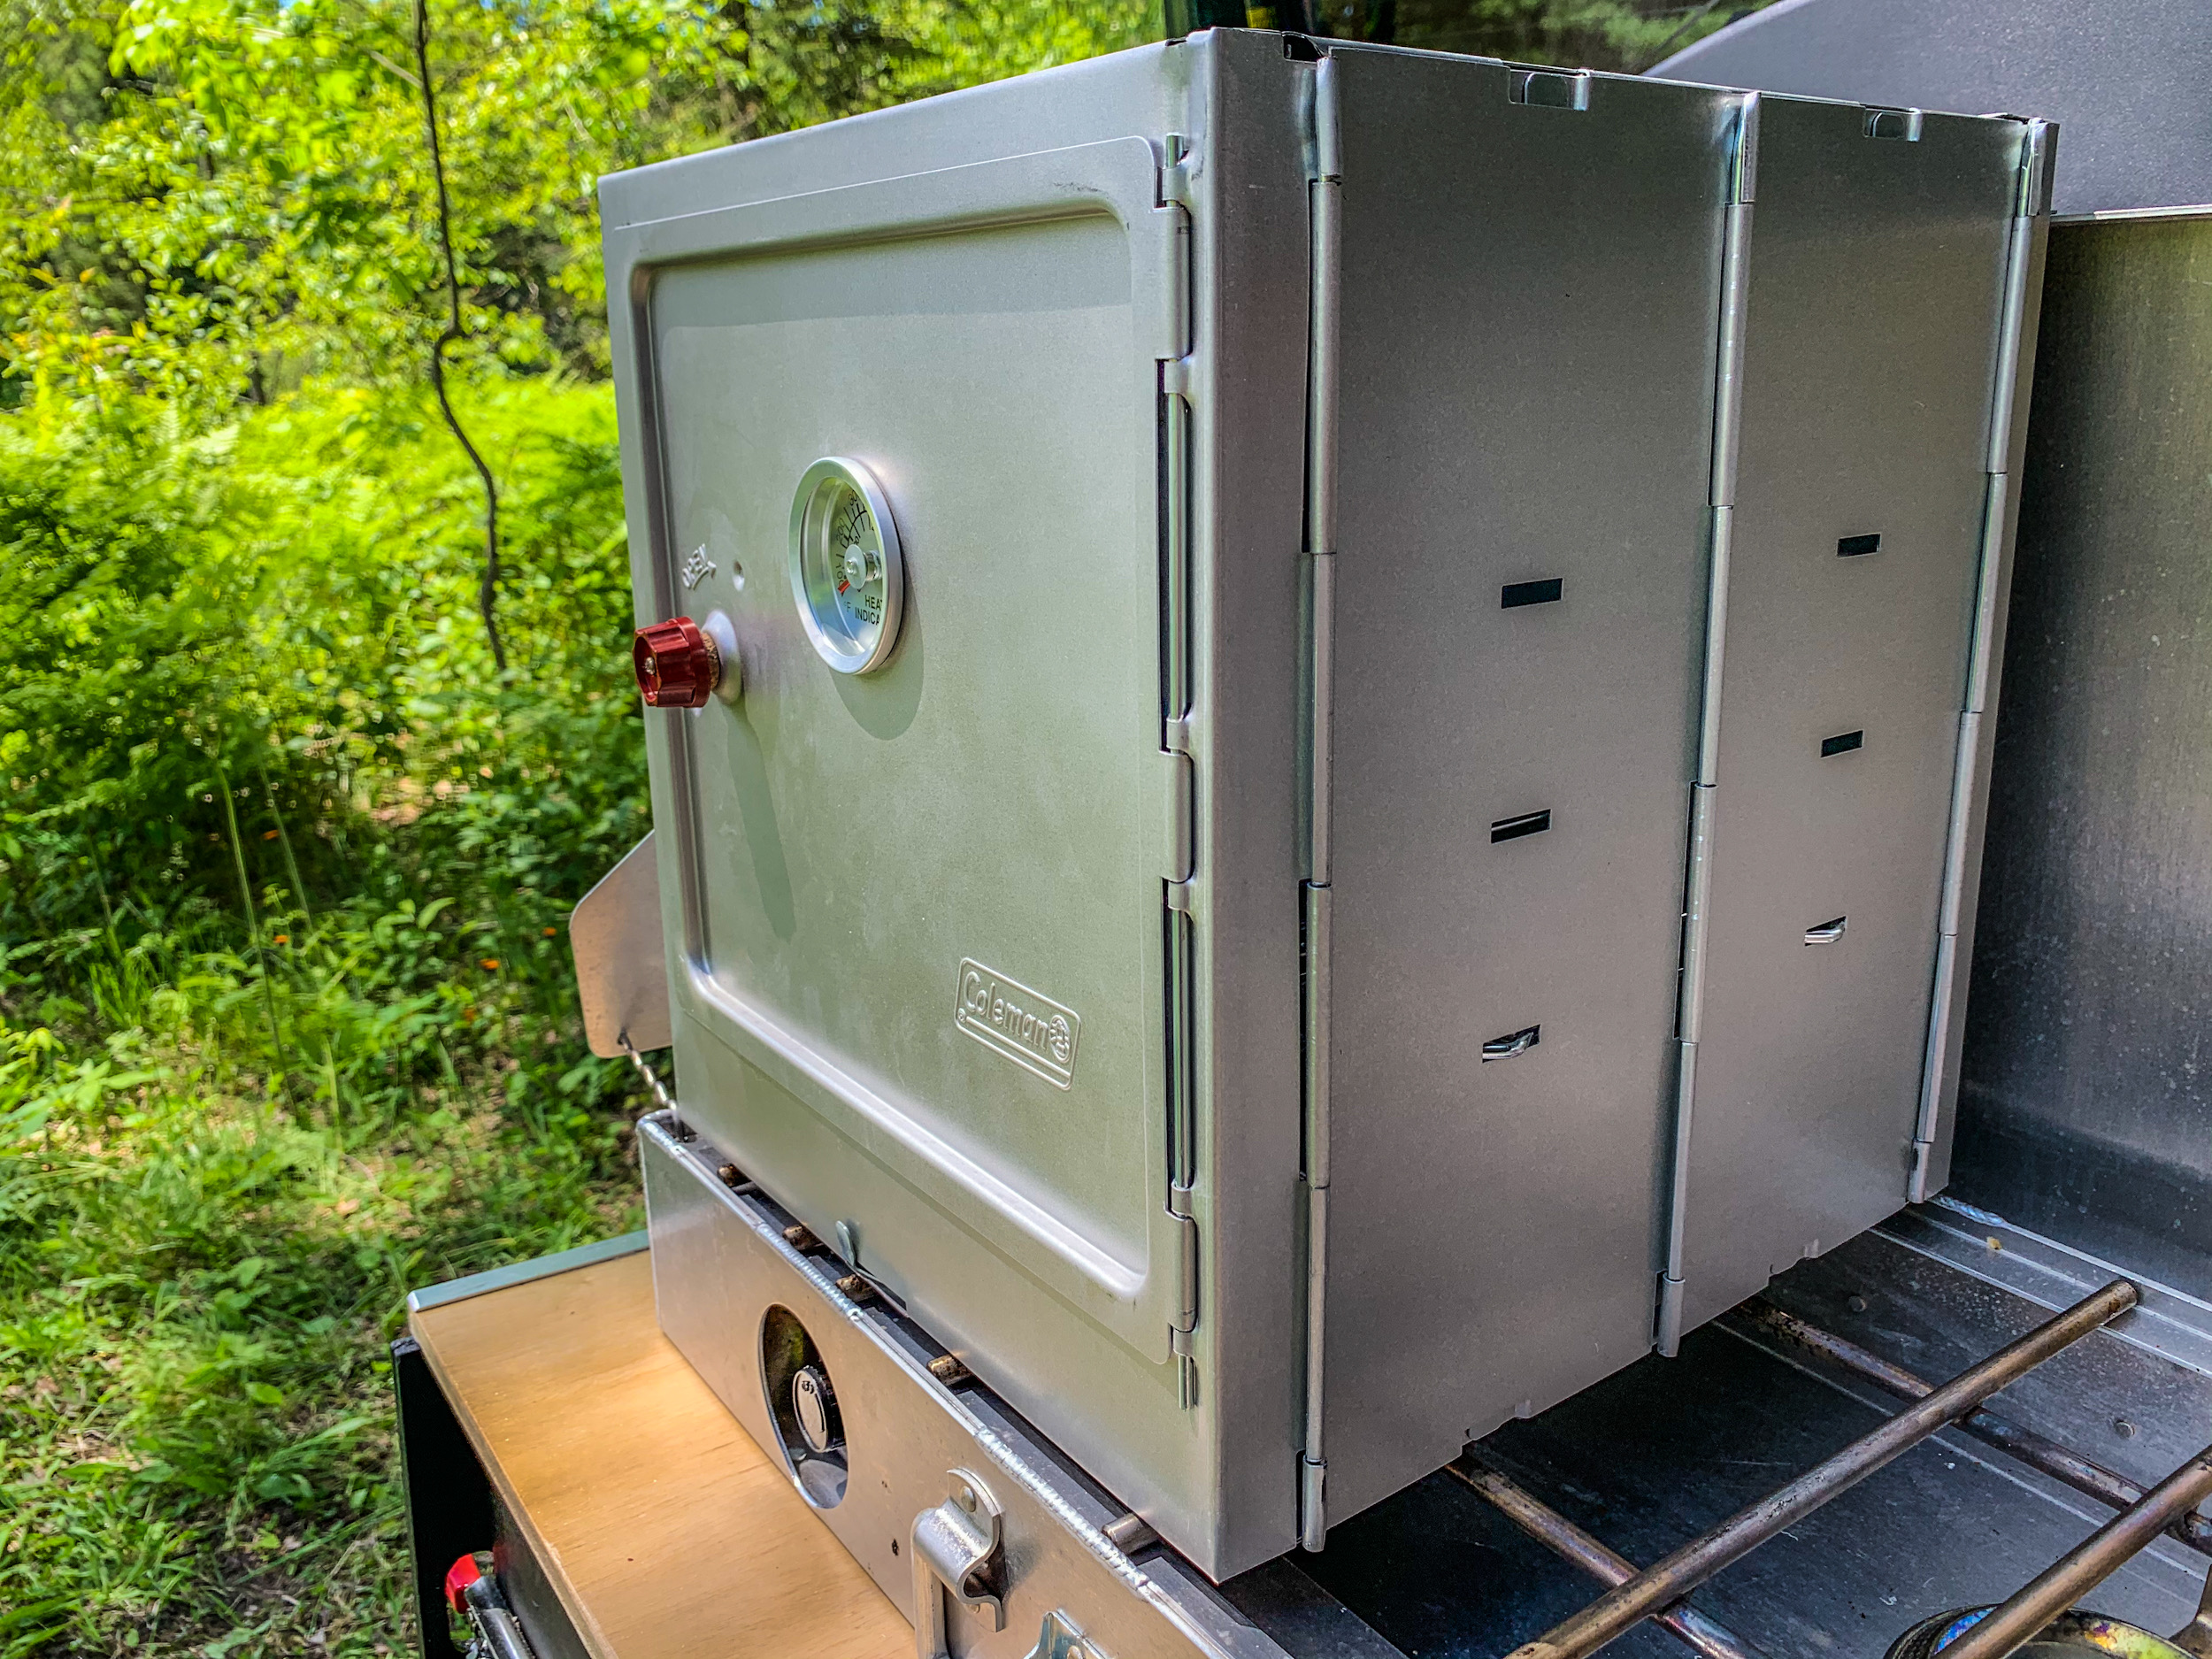 Baking off-grid with the Omnia Oven from Sweden - The Gear Bunker